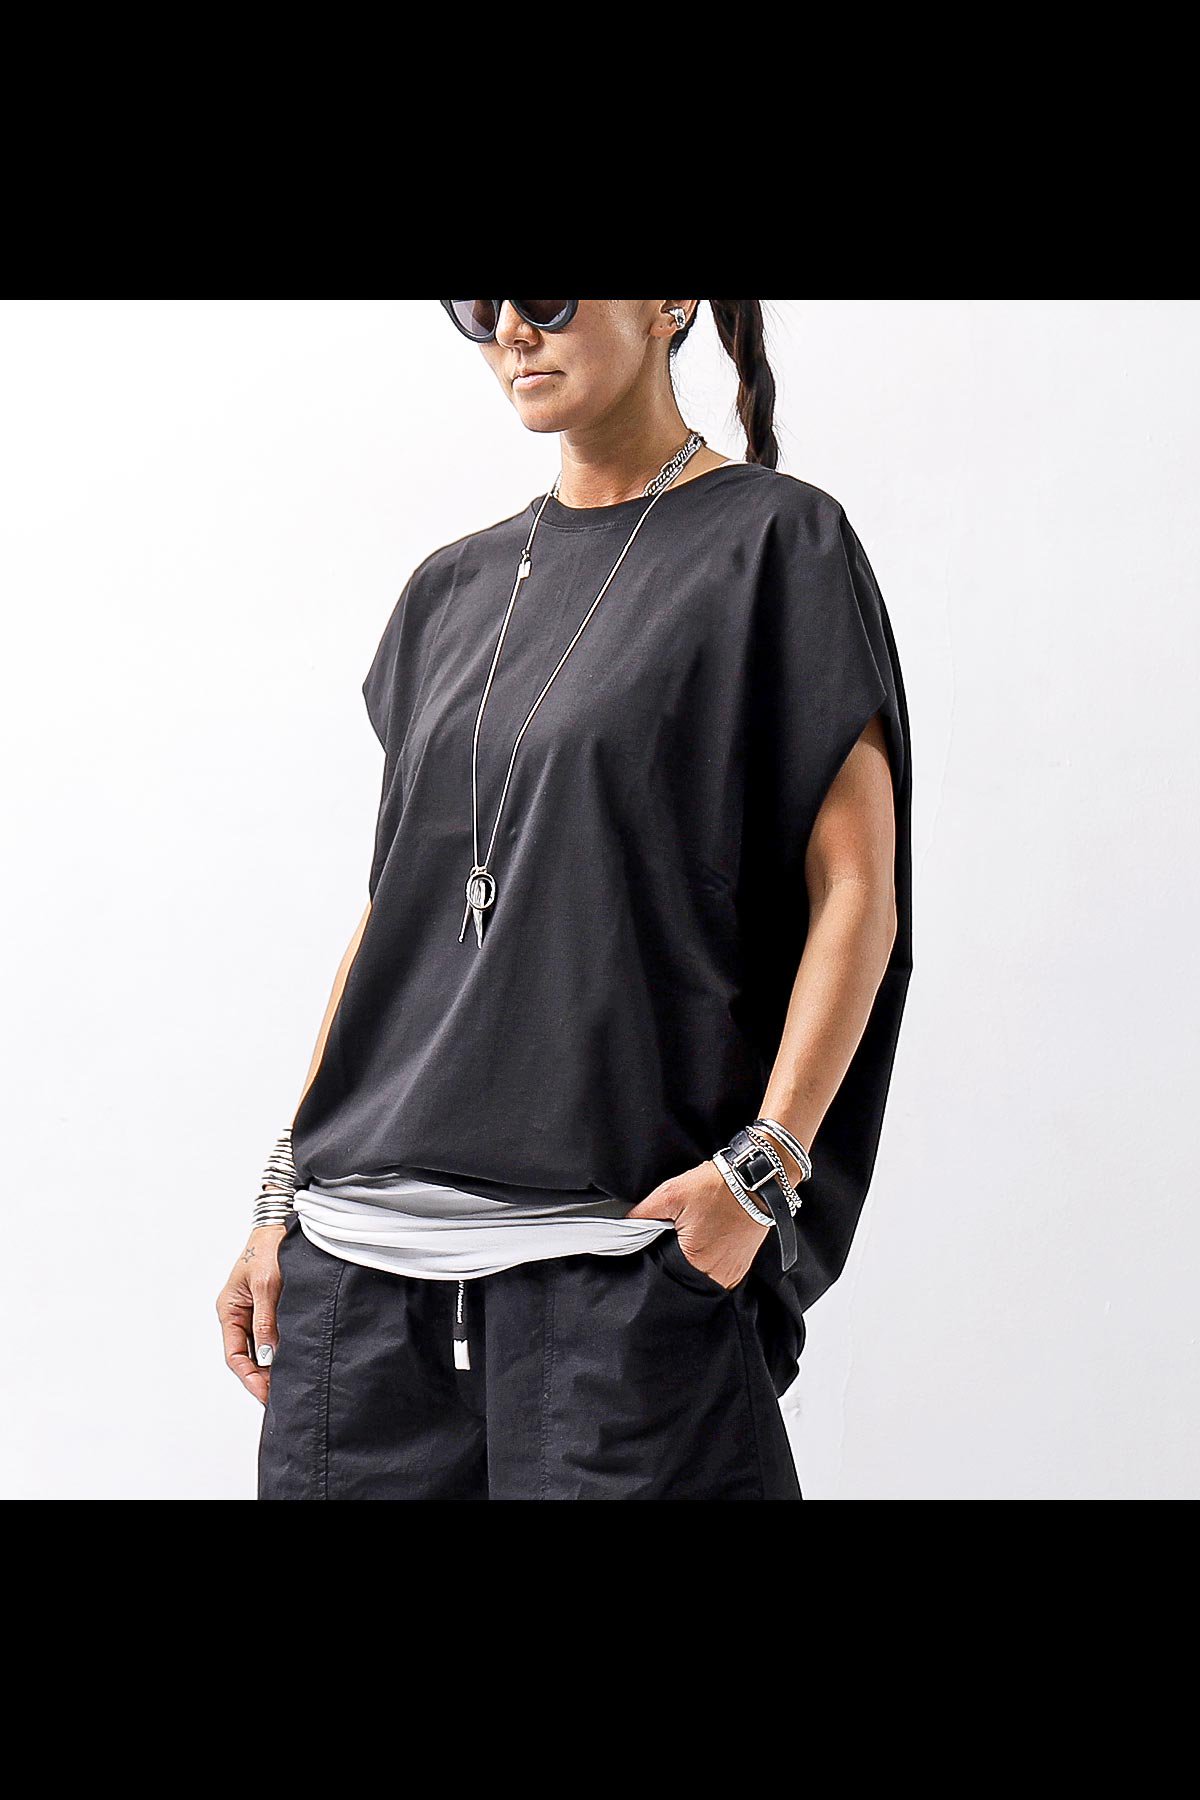 <img class='new_mark_img1' src='https://img.shop-pro.jp/img/new/icons8.gif' style='border:none;display:inline;margin:0px;padding:0px;width:auto;' />UNISEX OVERSIZED SLEVE-LESS TOP MTS787_BLACK